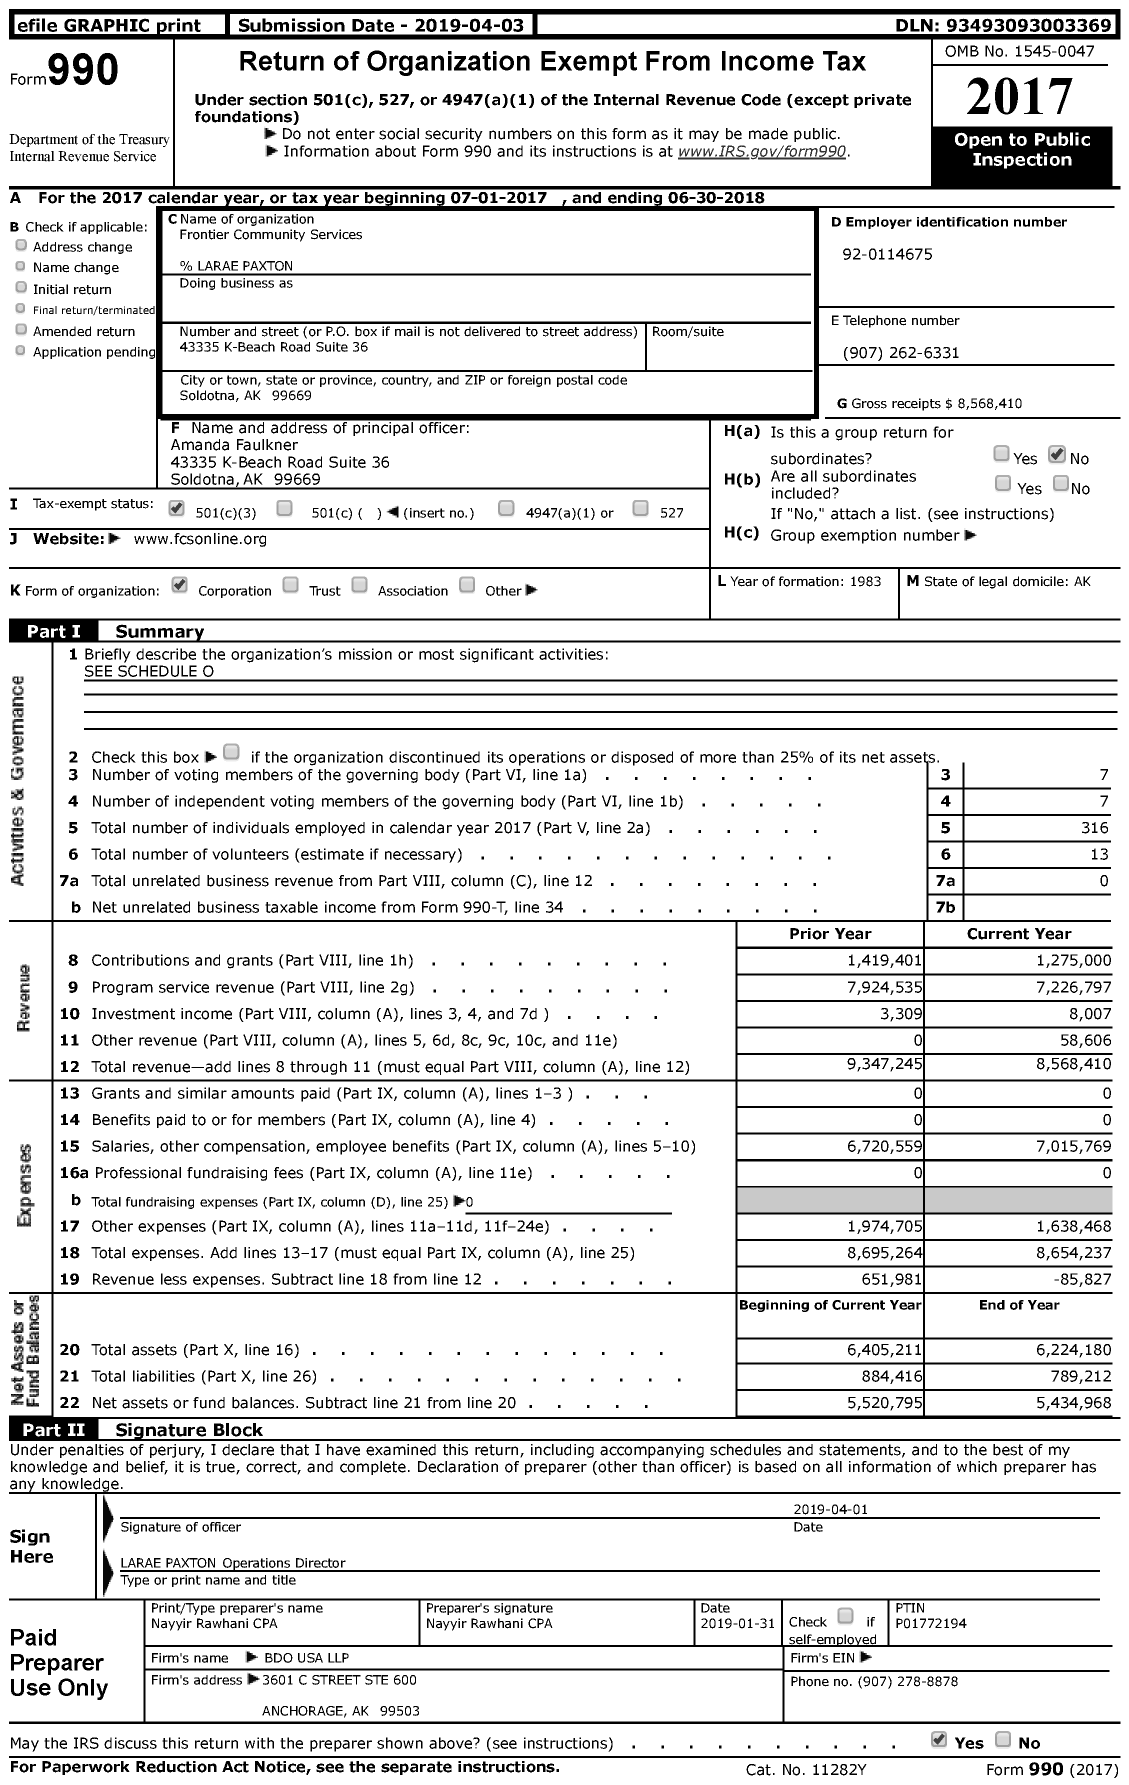 Image of first page of 2017 Form 990 for Frontier Community Services (FCS)